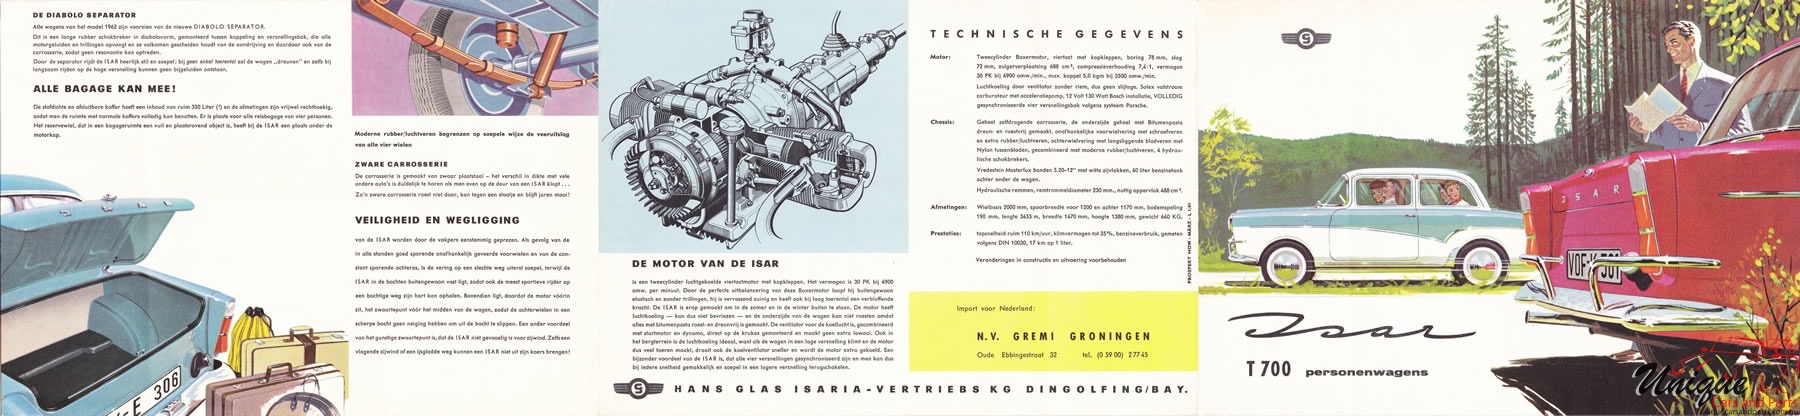 1971 Glas Isart T700s Brochure Page 2